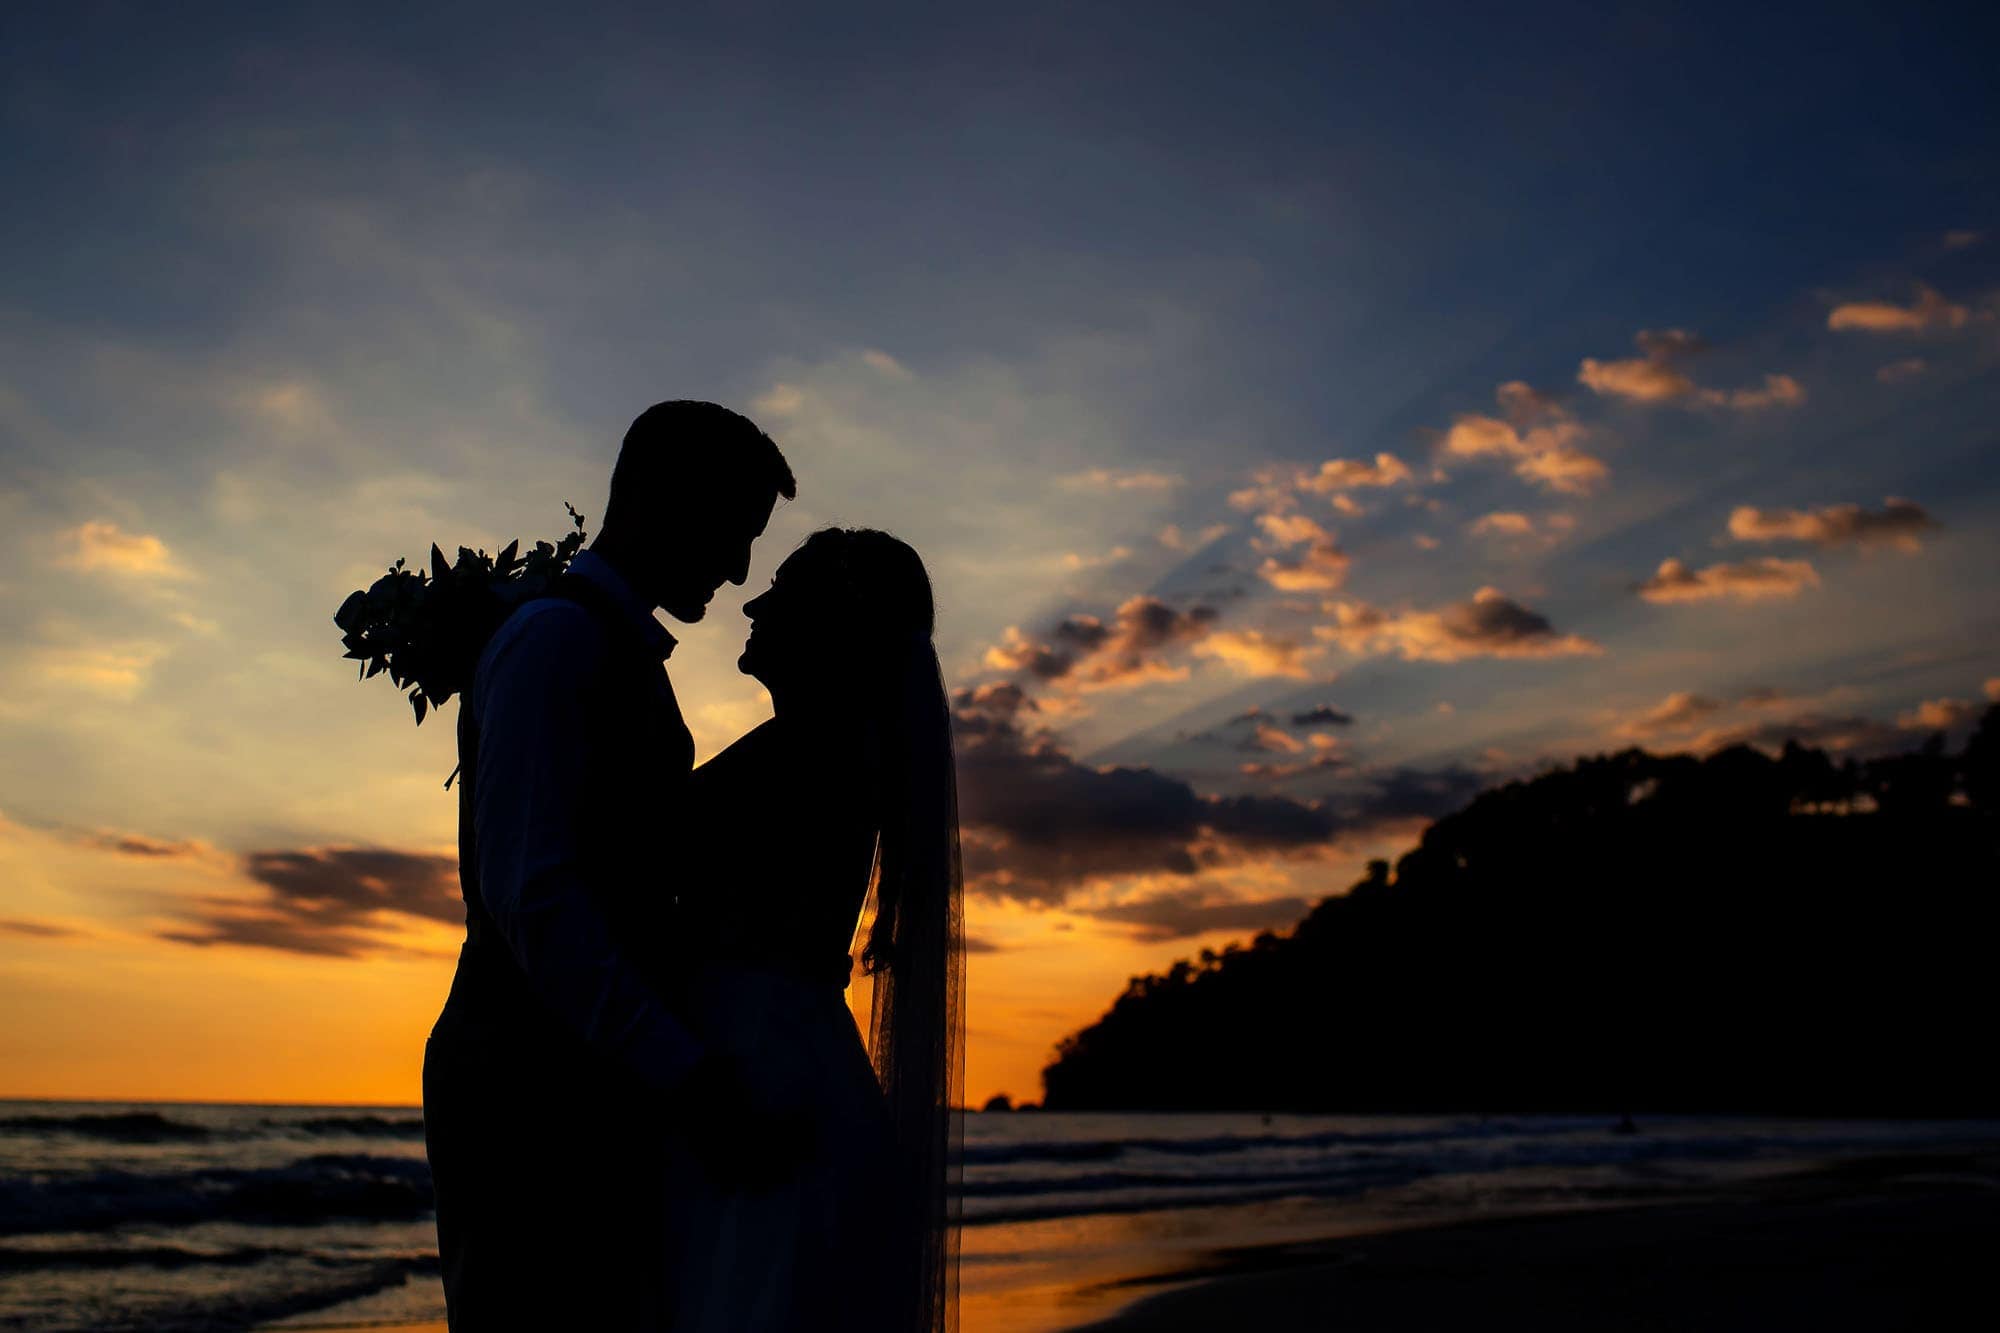 Silhouette images of the bride and groom on the beach